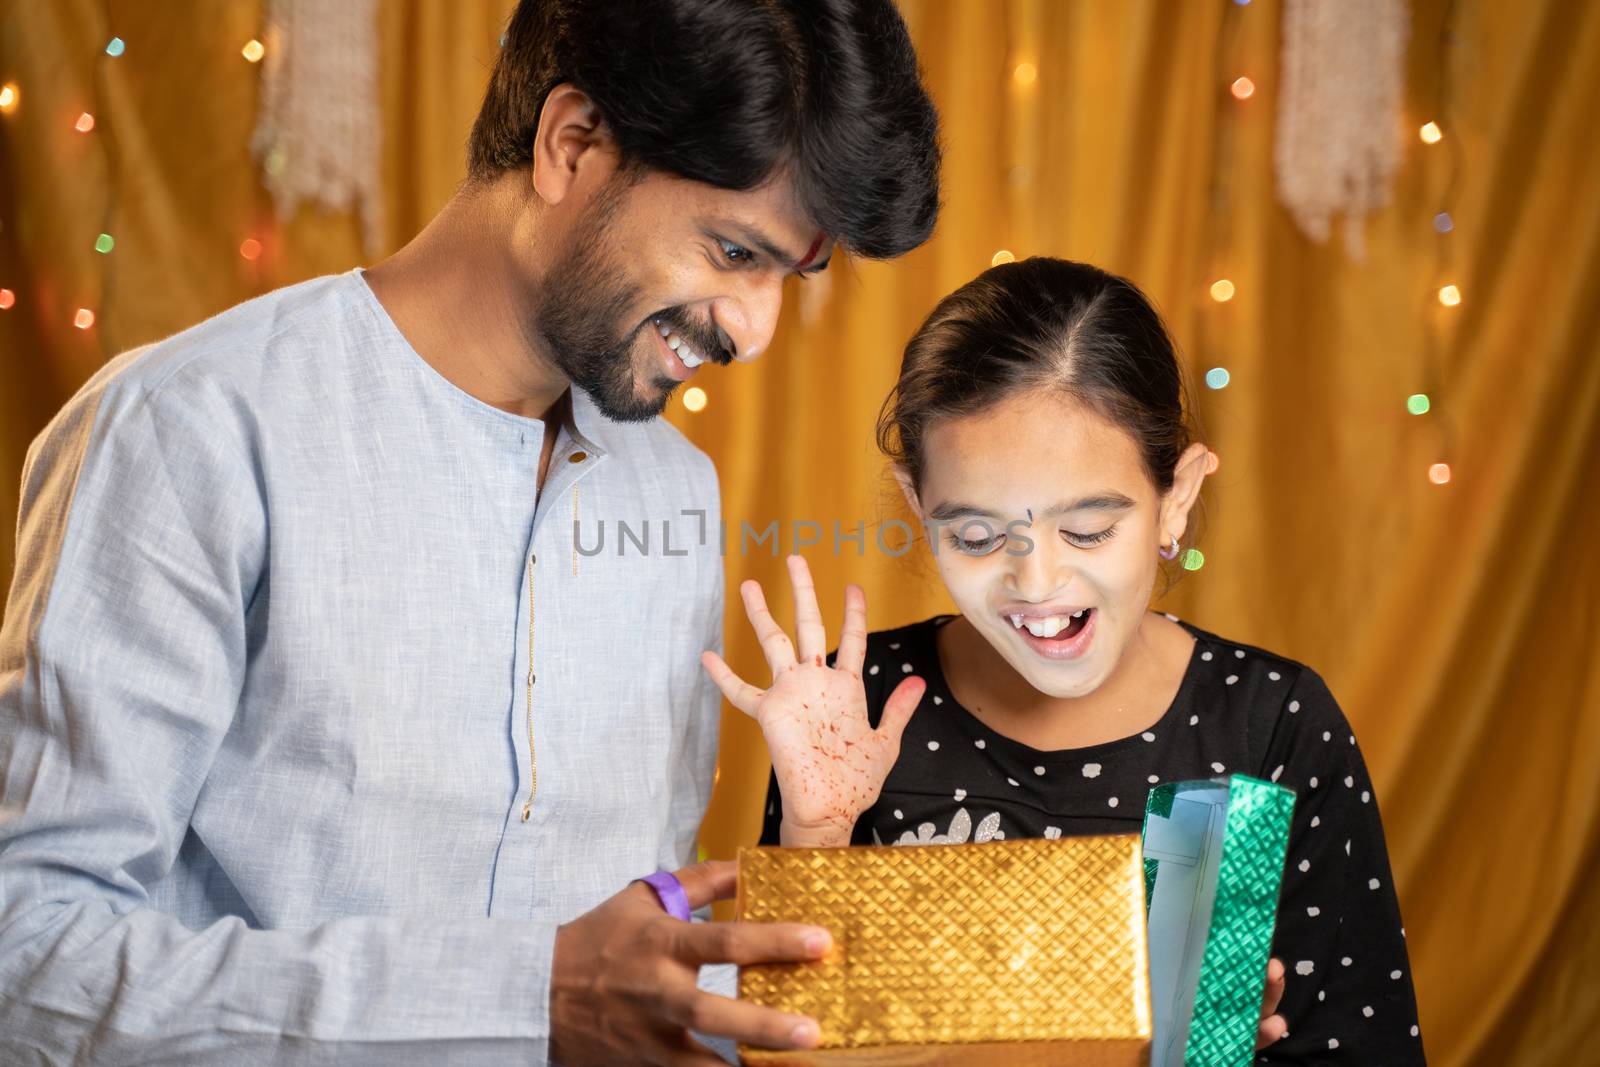 Excited little Siter got gift from her Bother during Raksha Bandhan, Bhai Dooj or Bhaubeej Indian religious festival ceremony